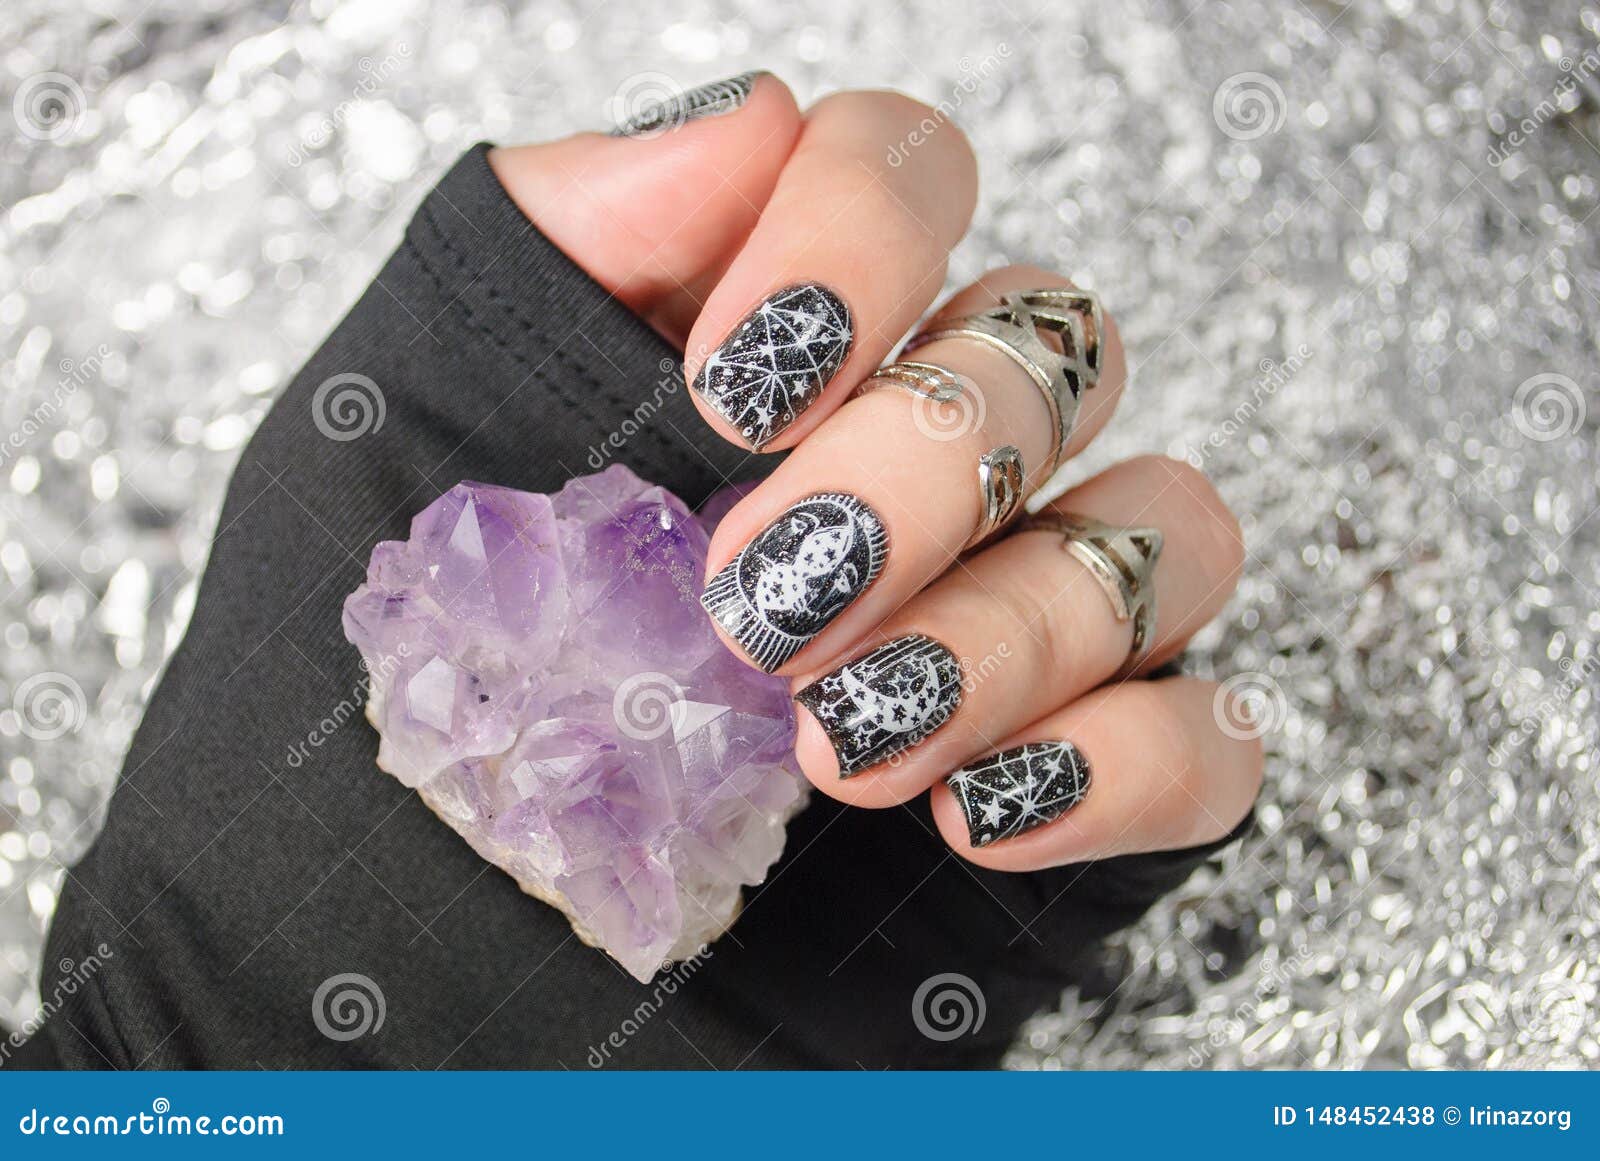 Black Gothic Manicure with Mystic Nail Art. Stock Photo - Image of  creative, grey: 148452438